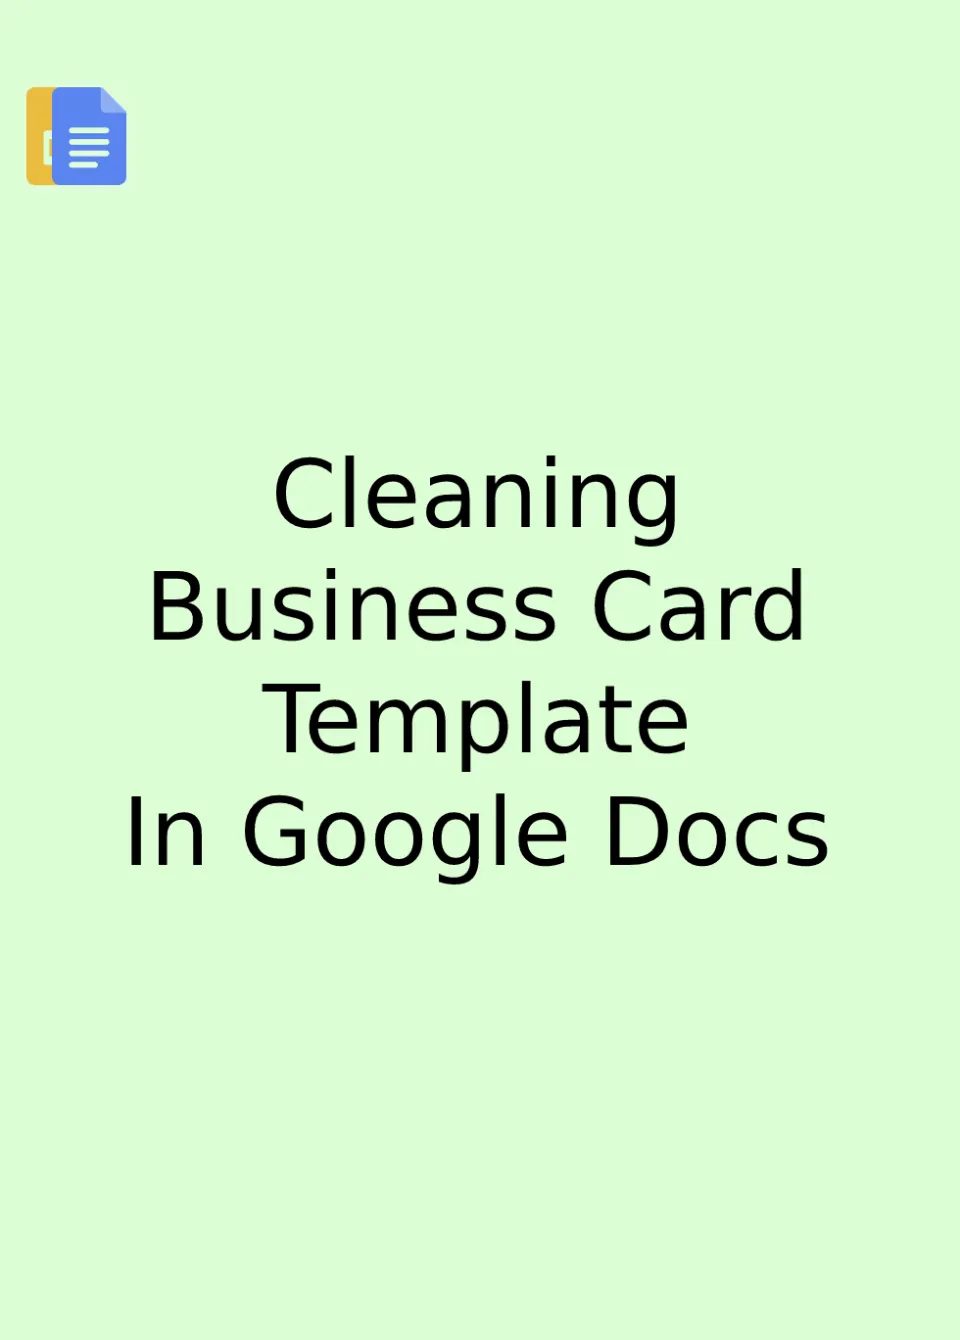 Cleaning Business Card Template Google Docs